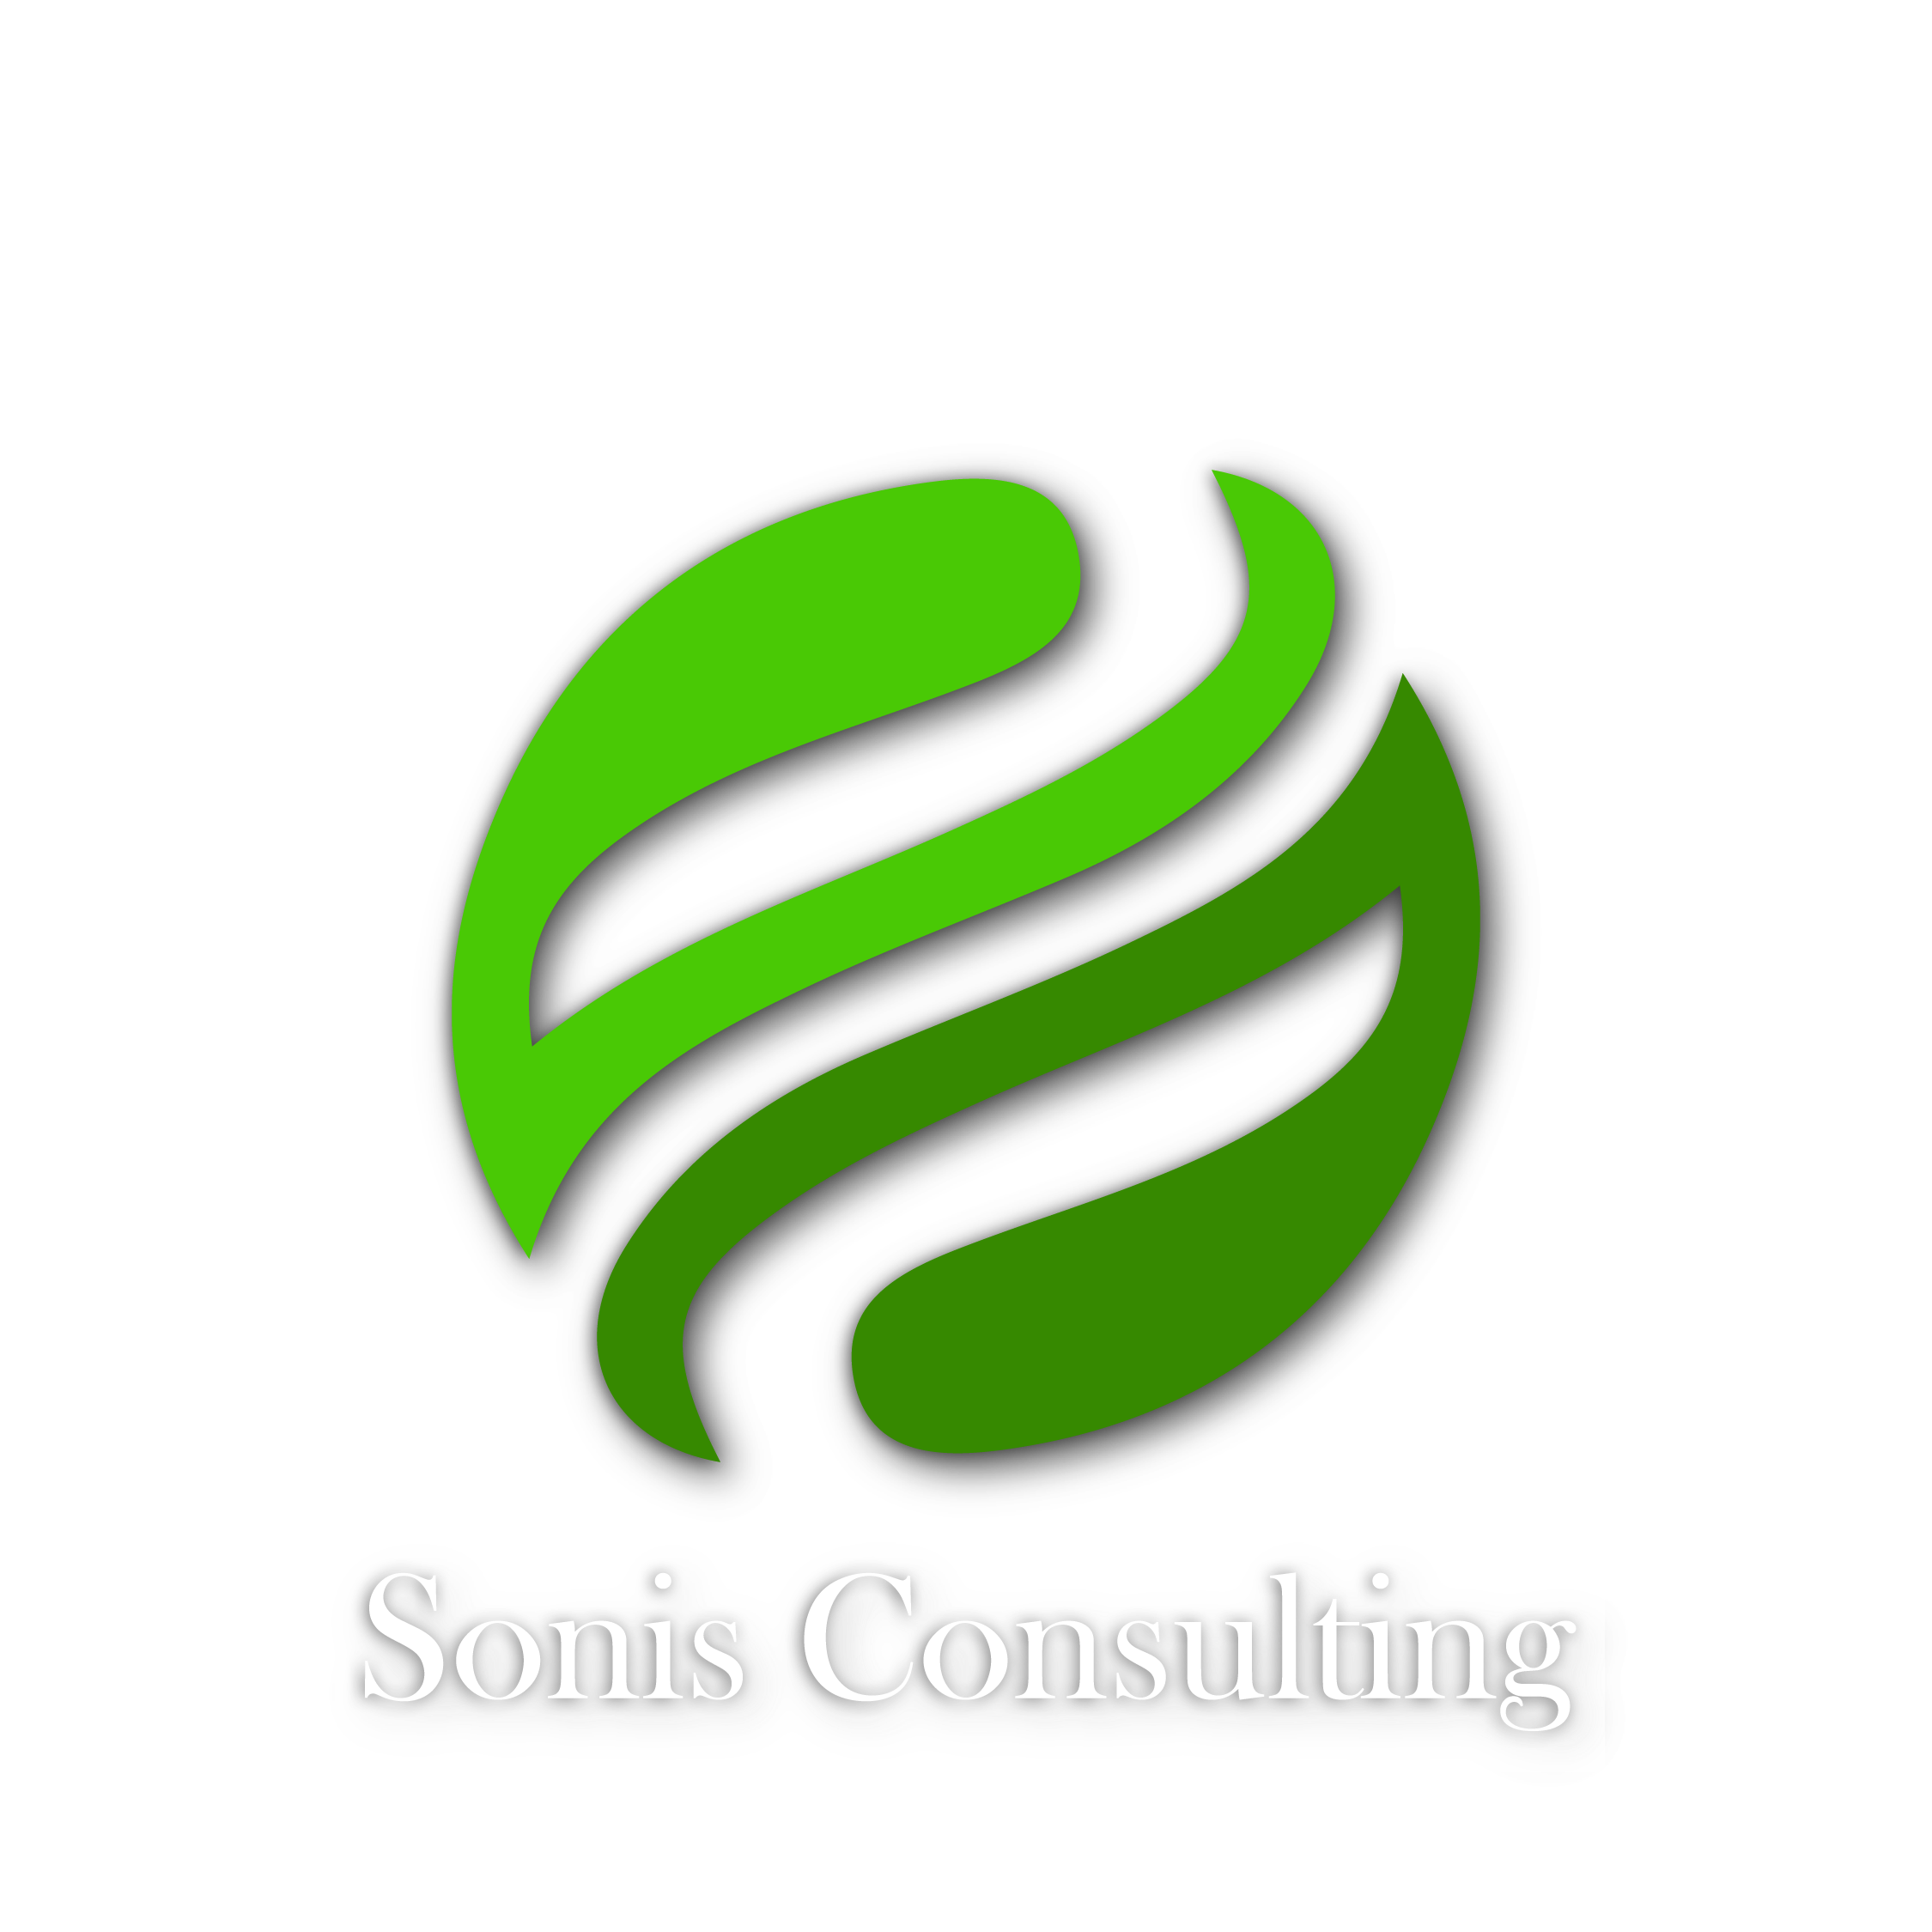 Sonis Consulting